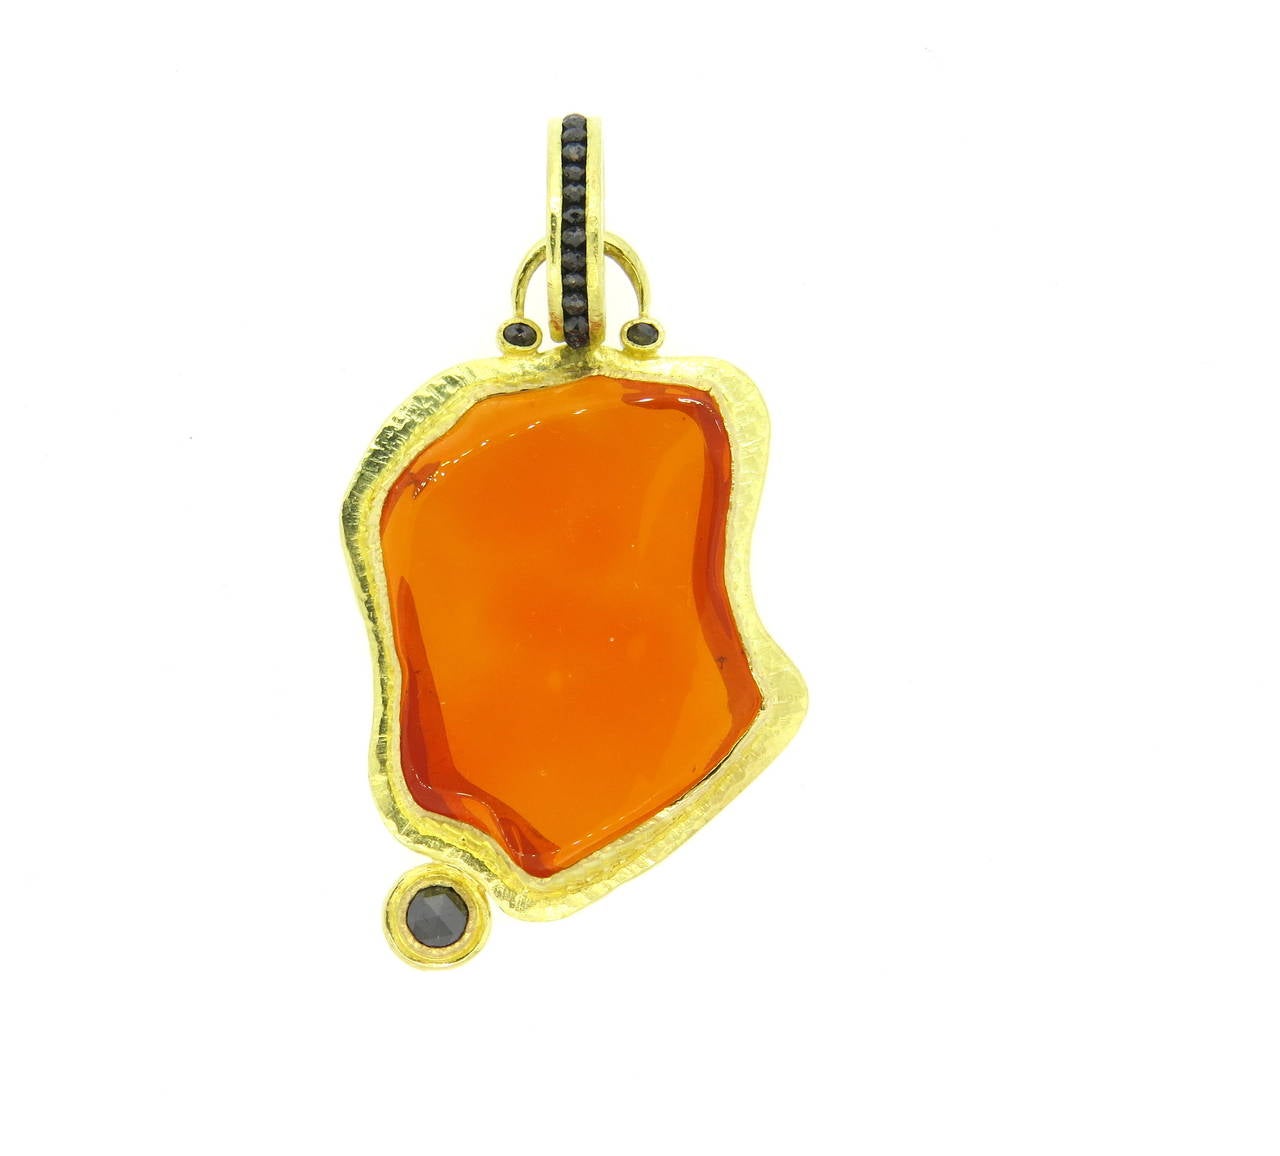 Unusual and impressive 18k gold large pendant, crafted by Hughes Bosca, set with jelly opal and black diamonds. Pendant measures 77mm with bale x 38mm. Marked Hughes Bosca and 18k. Weight of the piece - 33.7 grams